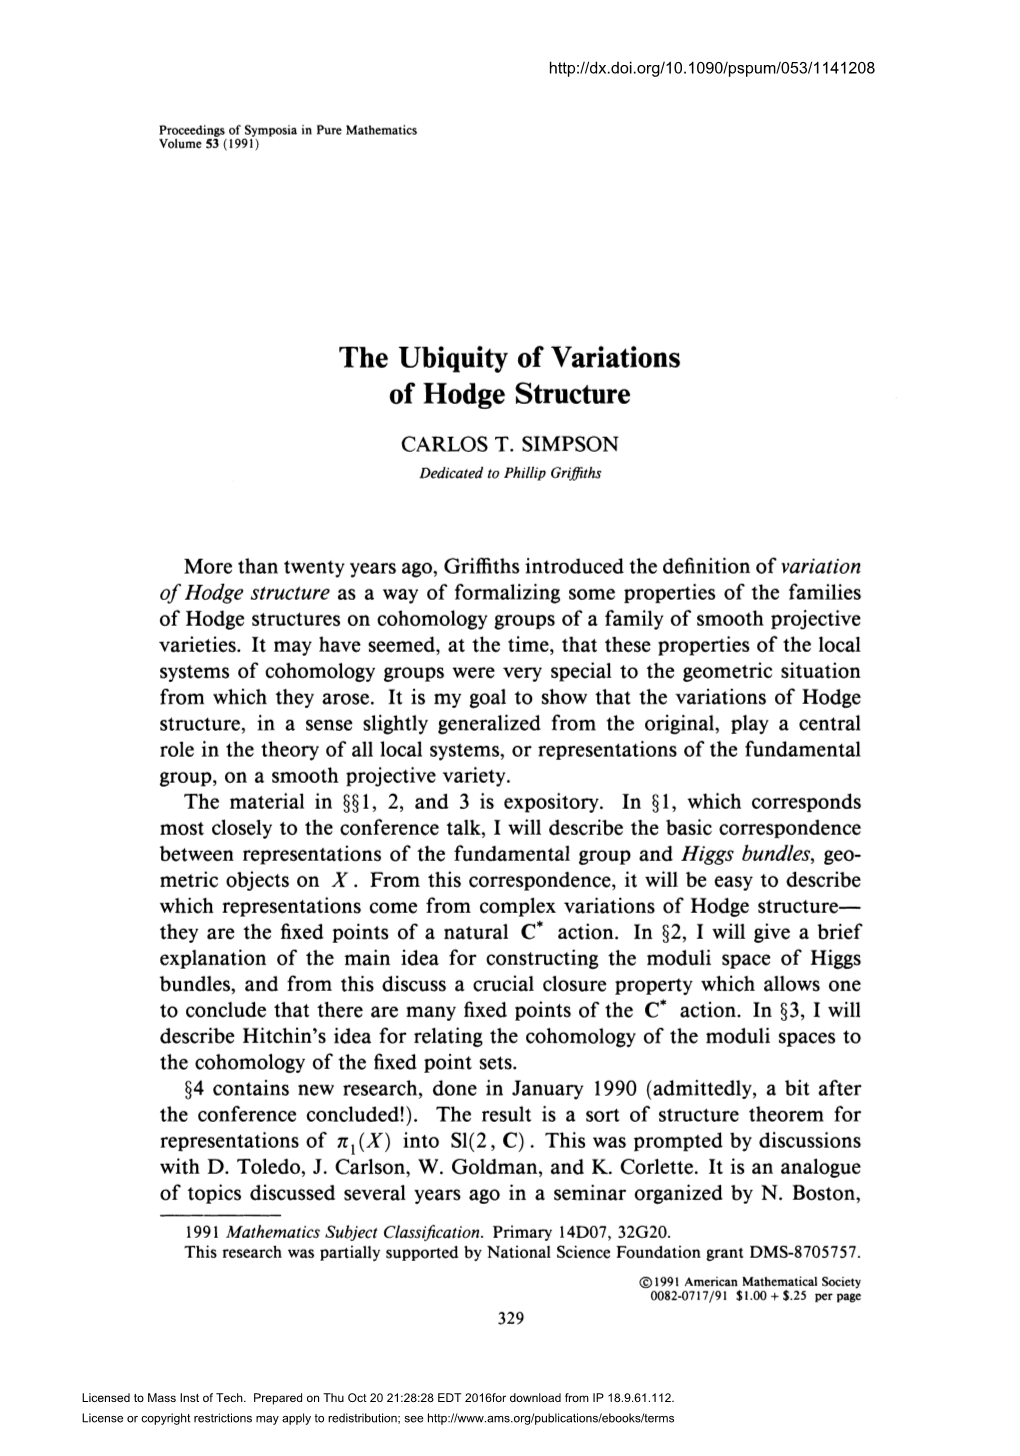 The Ubiquity of Variations of Hodge Structure CARLOS T